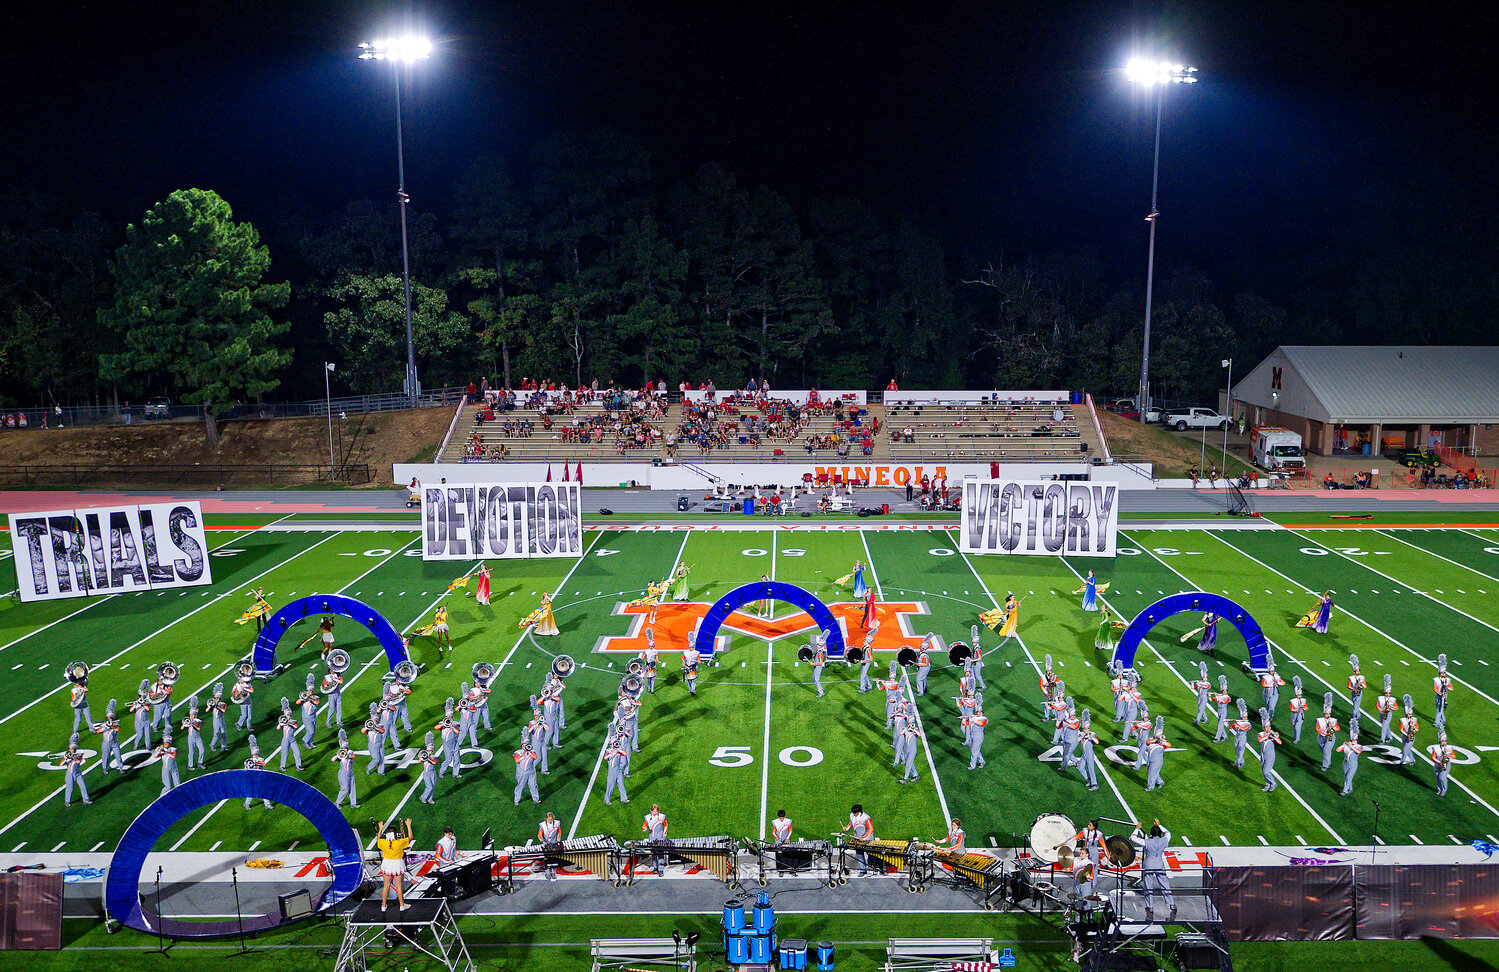 Mineola performs their competition show during halftime of the Pottsboro game Friday on the field at Meredith Memorial Stadium, where bands from around the area will compete Monday.